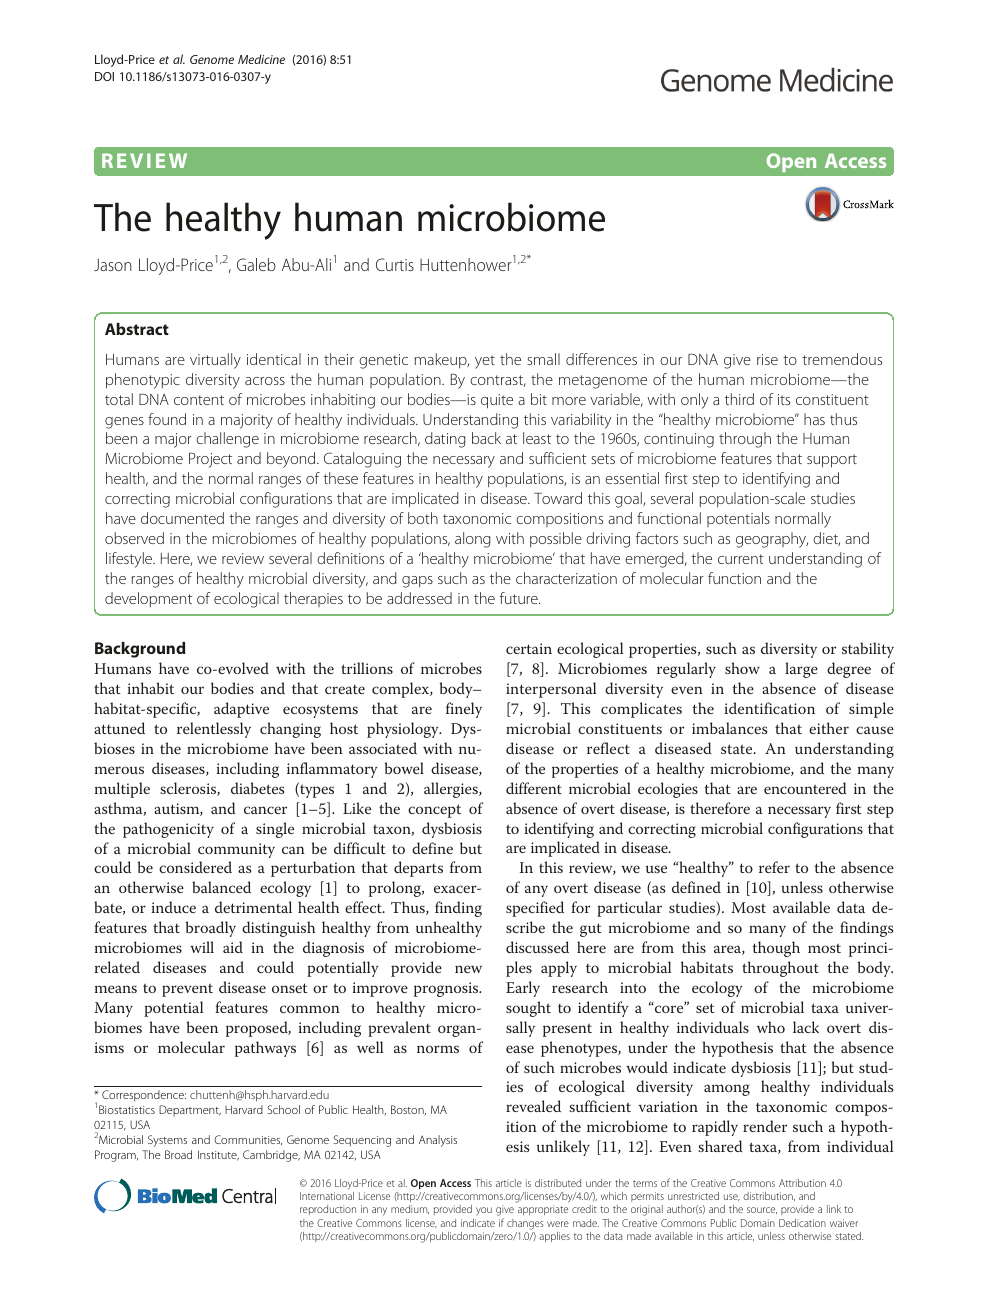 The Healthy Human Microbiome Topic Of Research Paper In